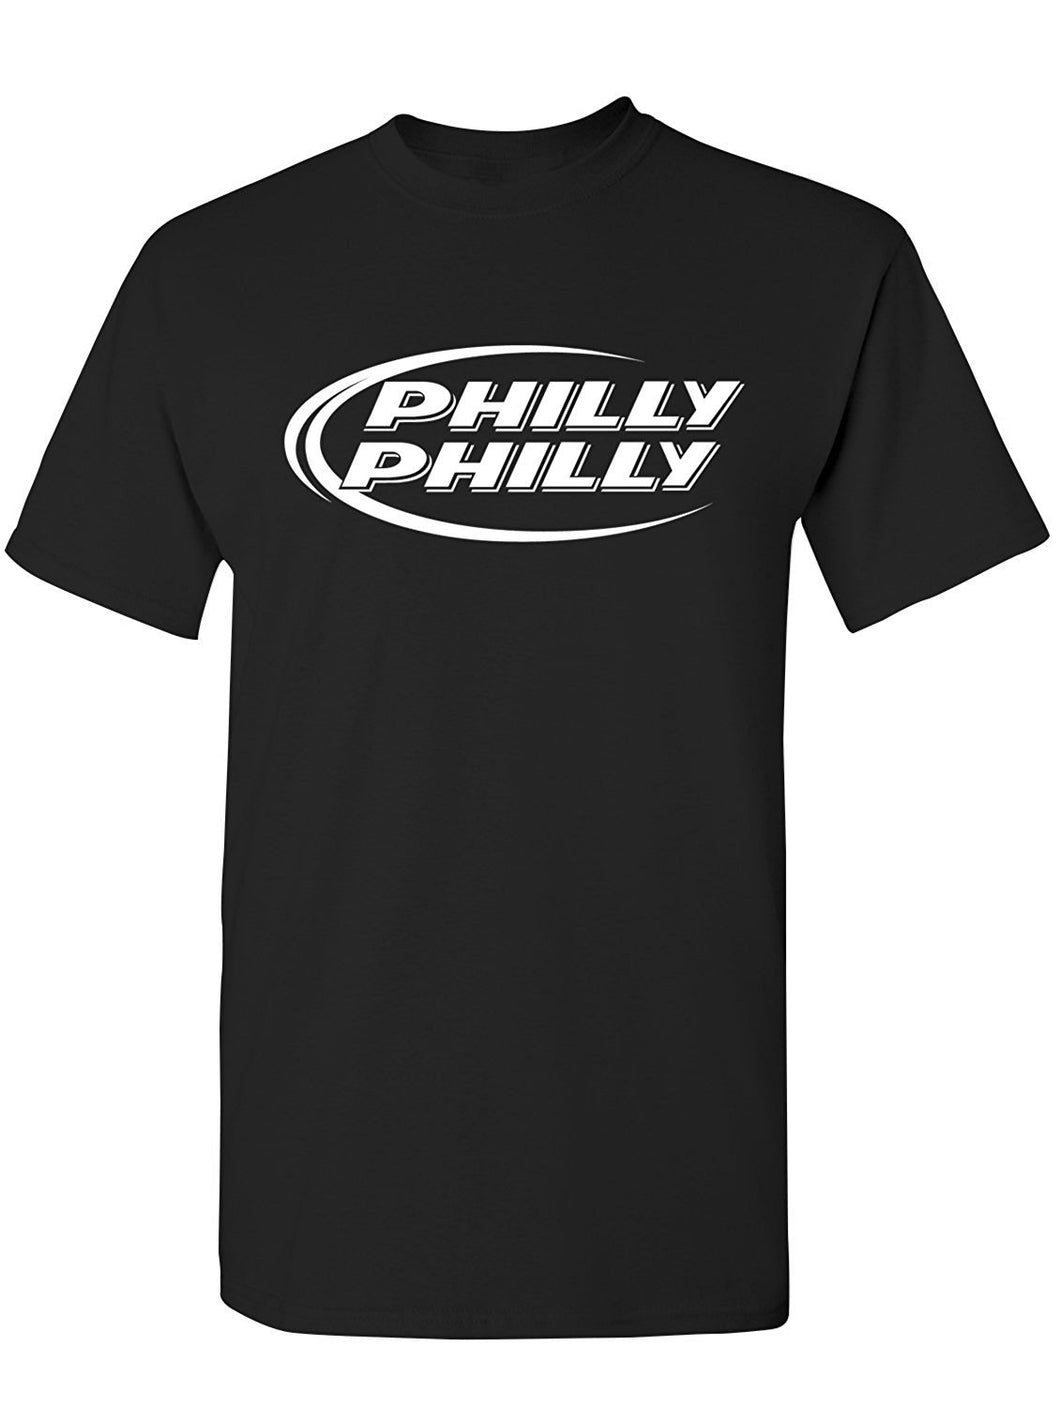 Manateez Men's Budlight Philly Philly Tee Shirt